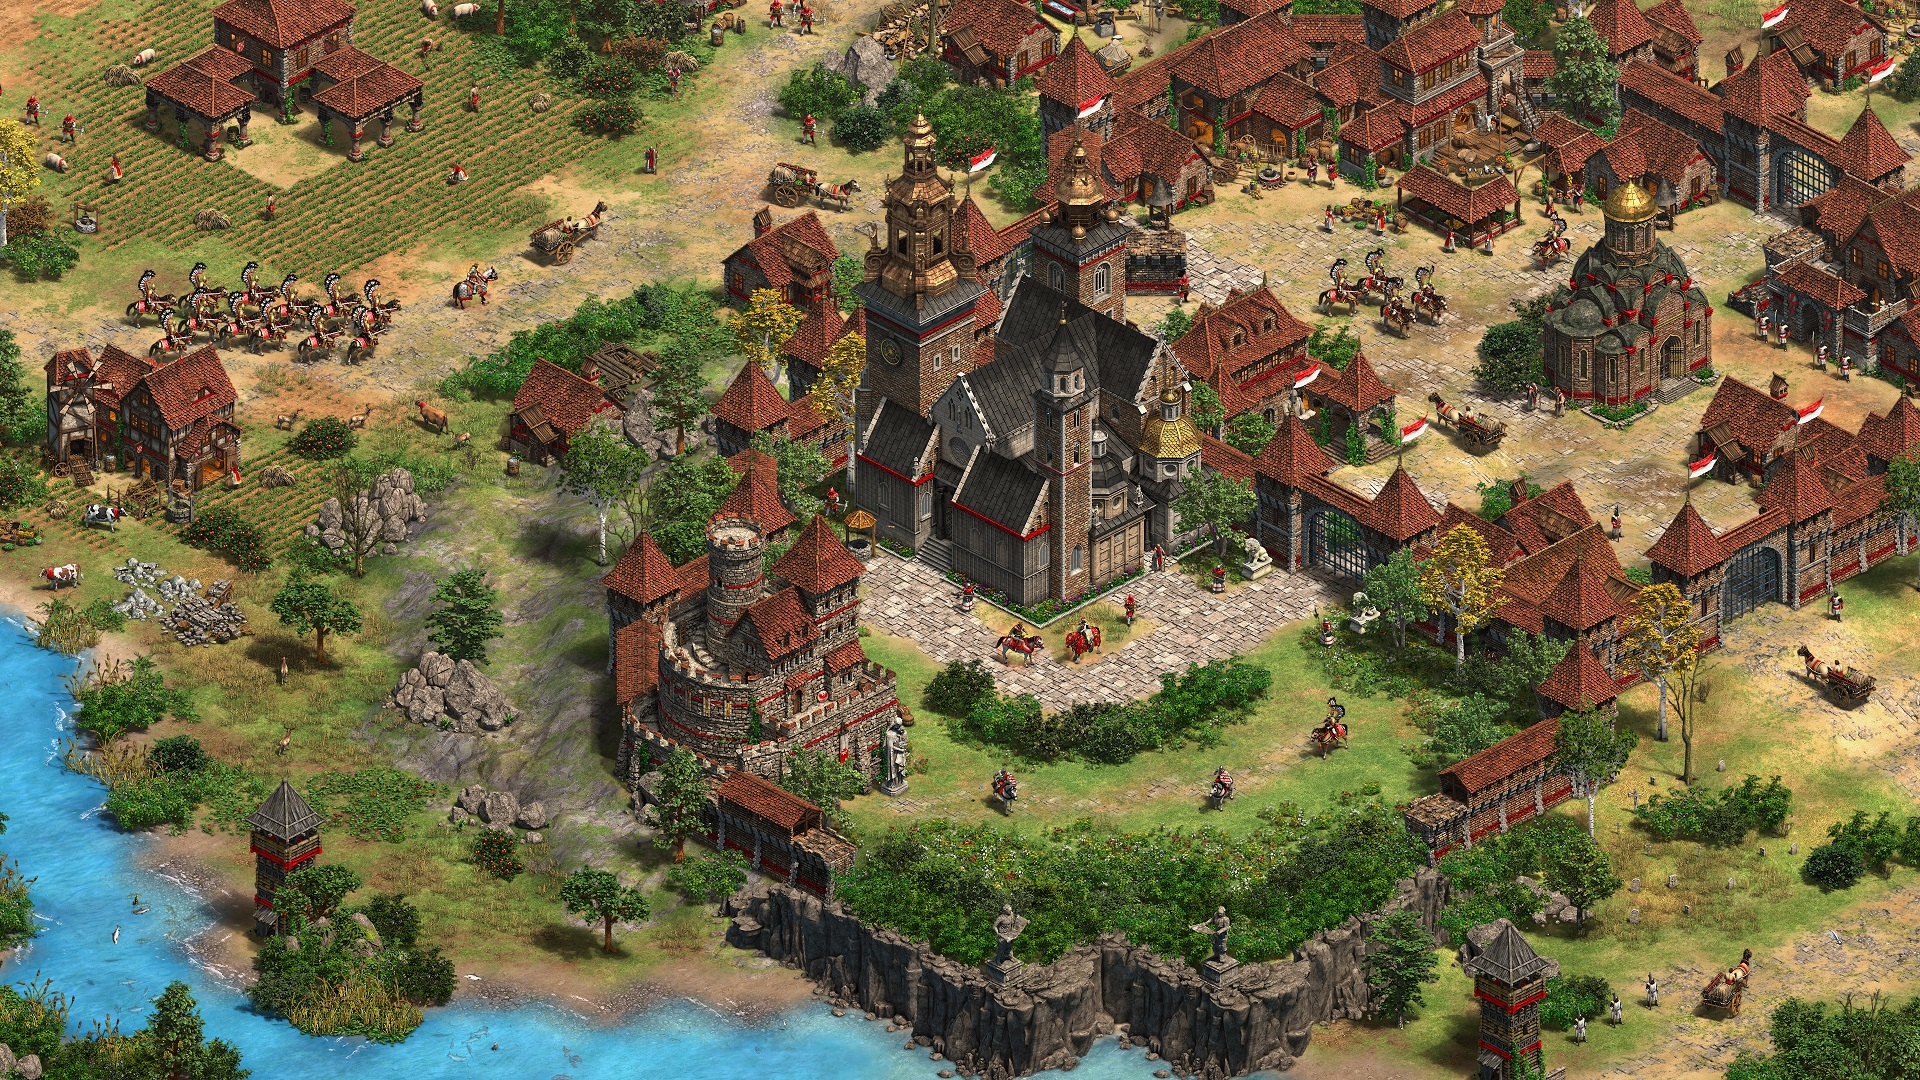 Age of Empires 2 Definitive Edition Update 51737 Patch Notes - August 10,  2021